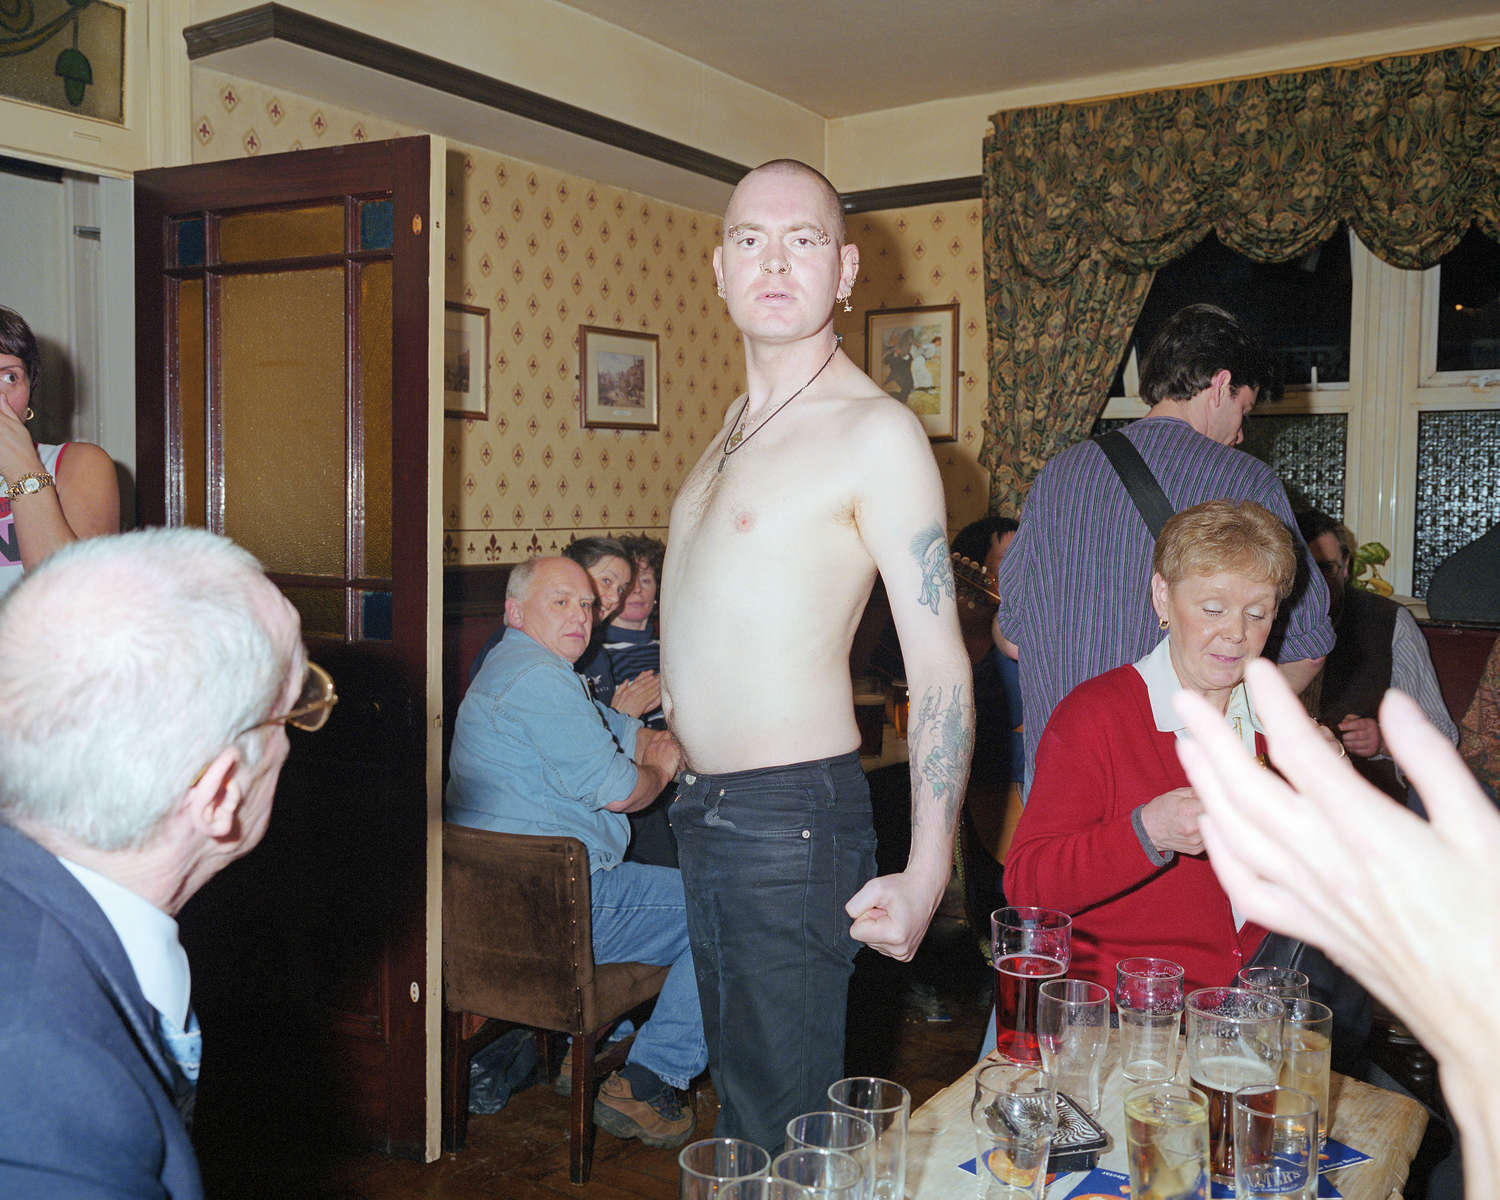 A bare-chested skinhead postures in a pub in the Lancashire town of Bacup. April 2001